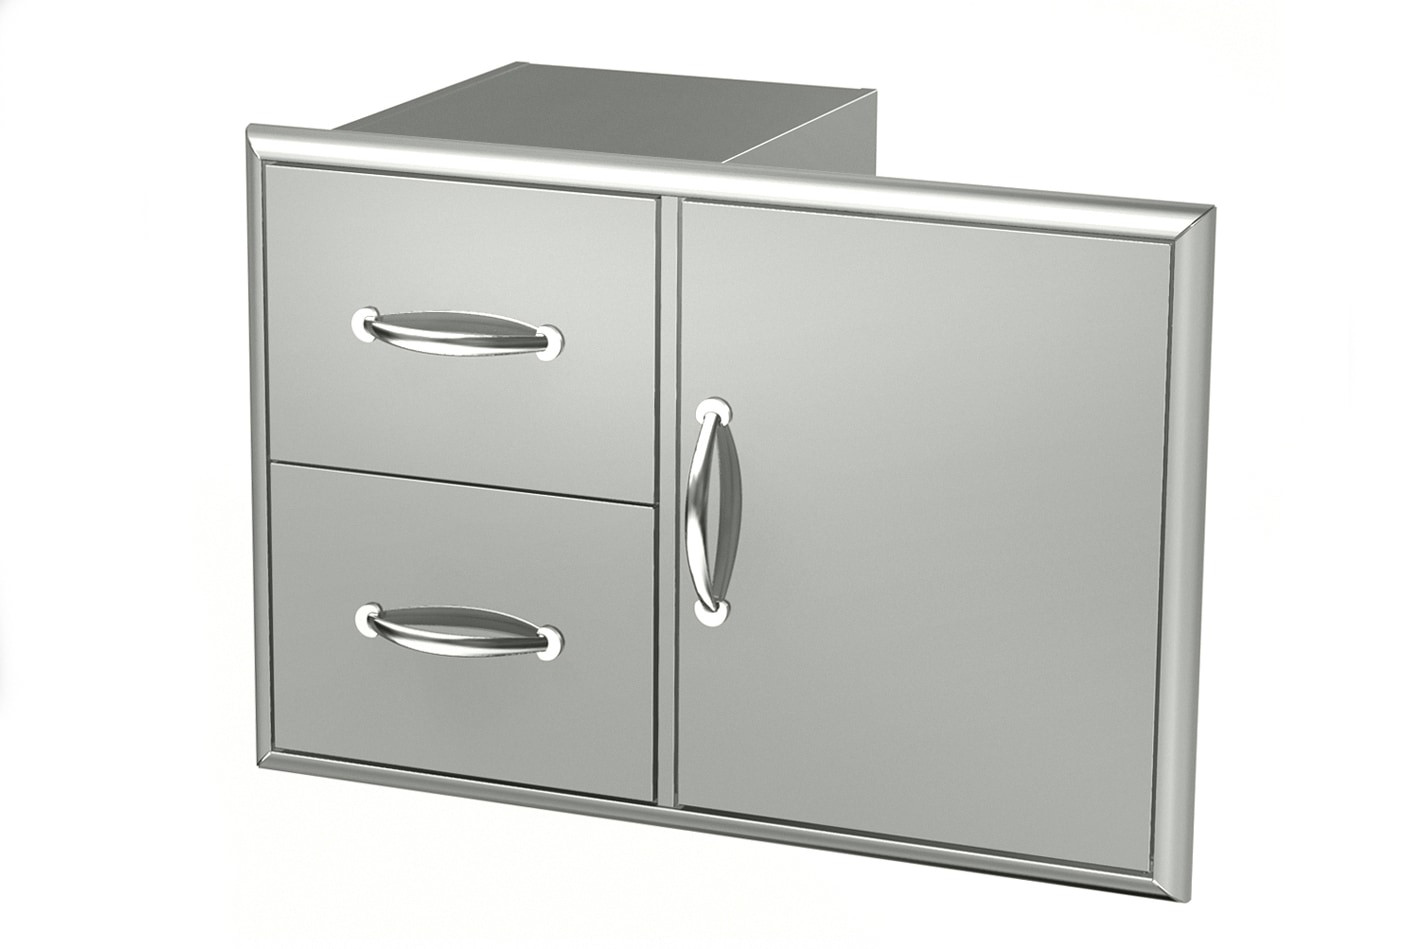 Outdoor Kitchen Drawers
 BroilChef Stainless Steel Drawers Stainless Steel Double